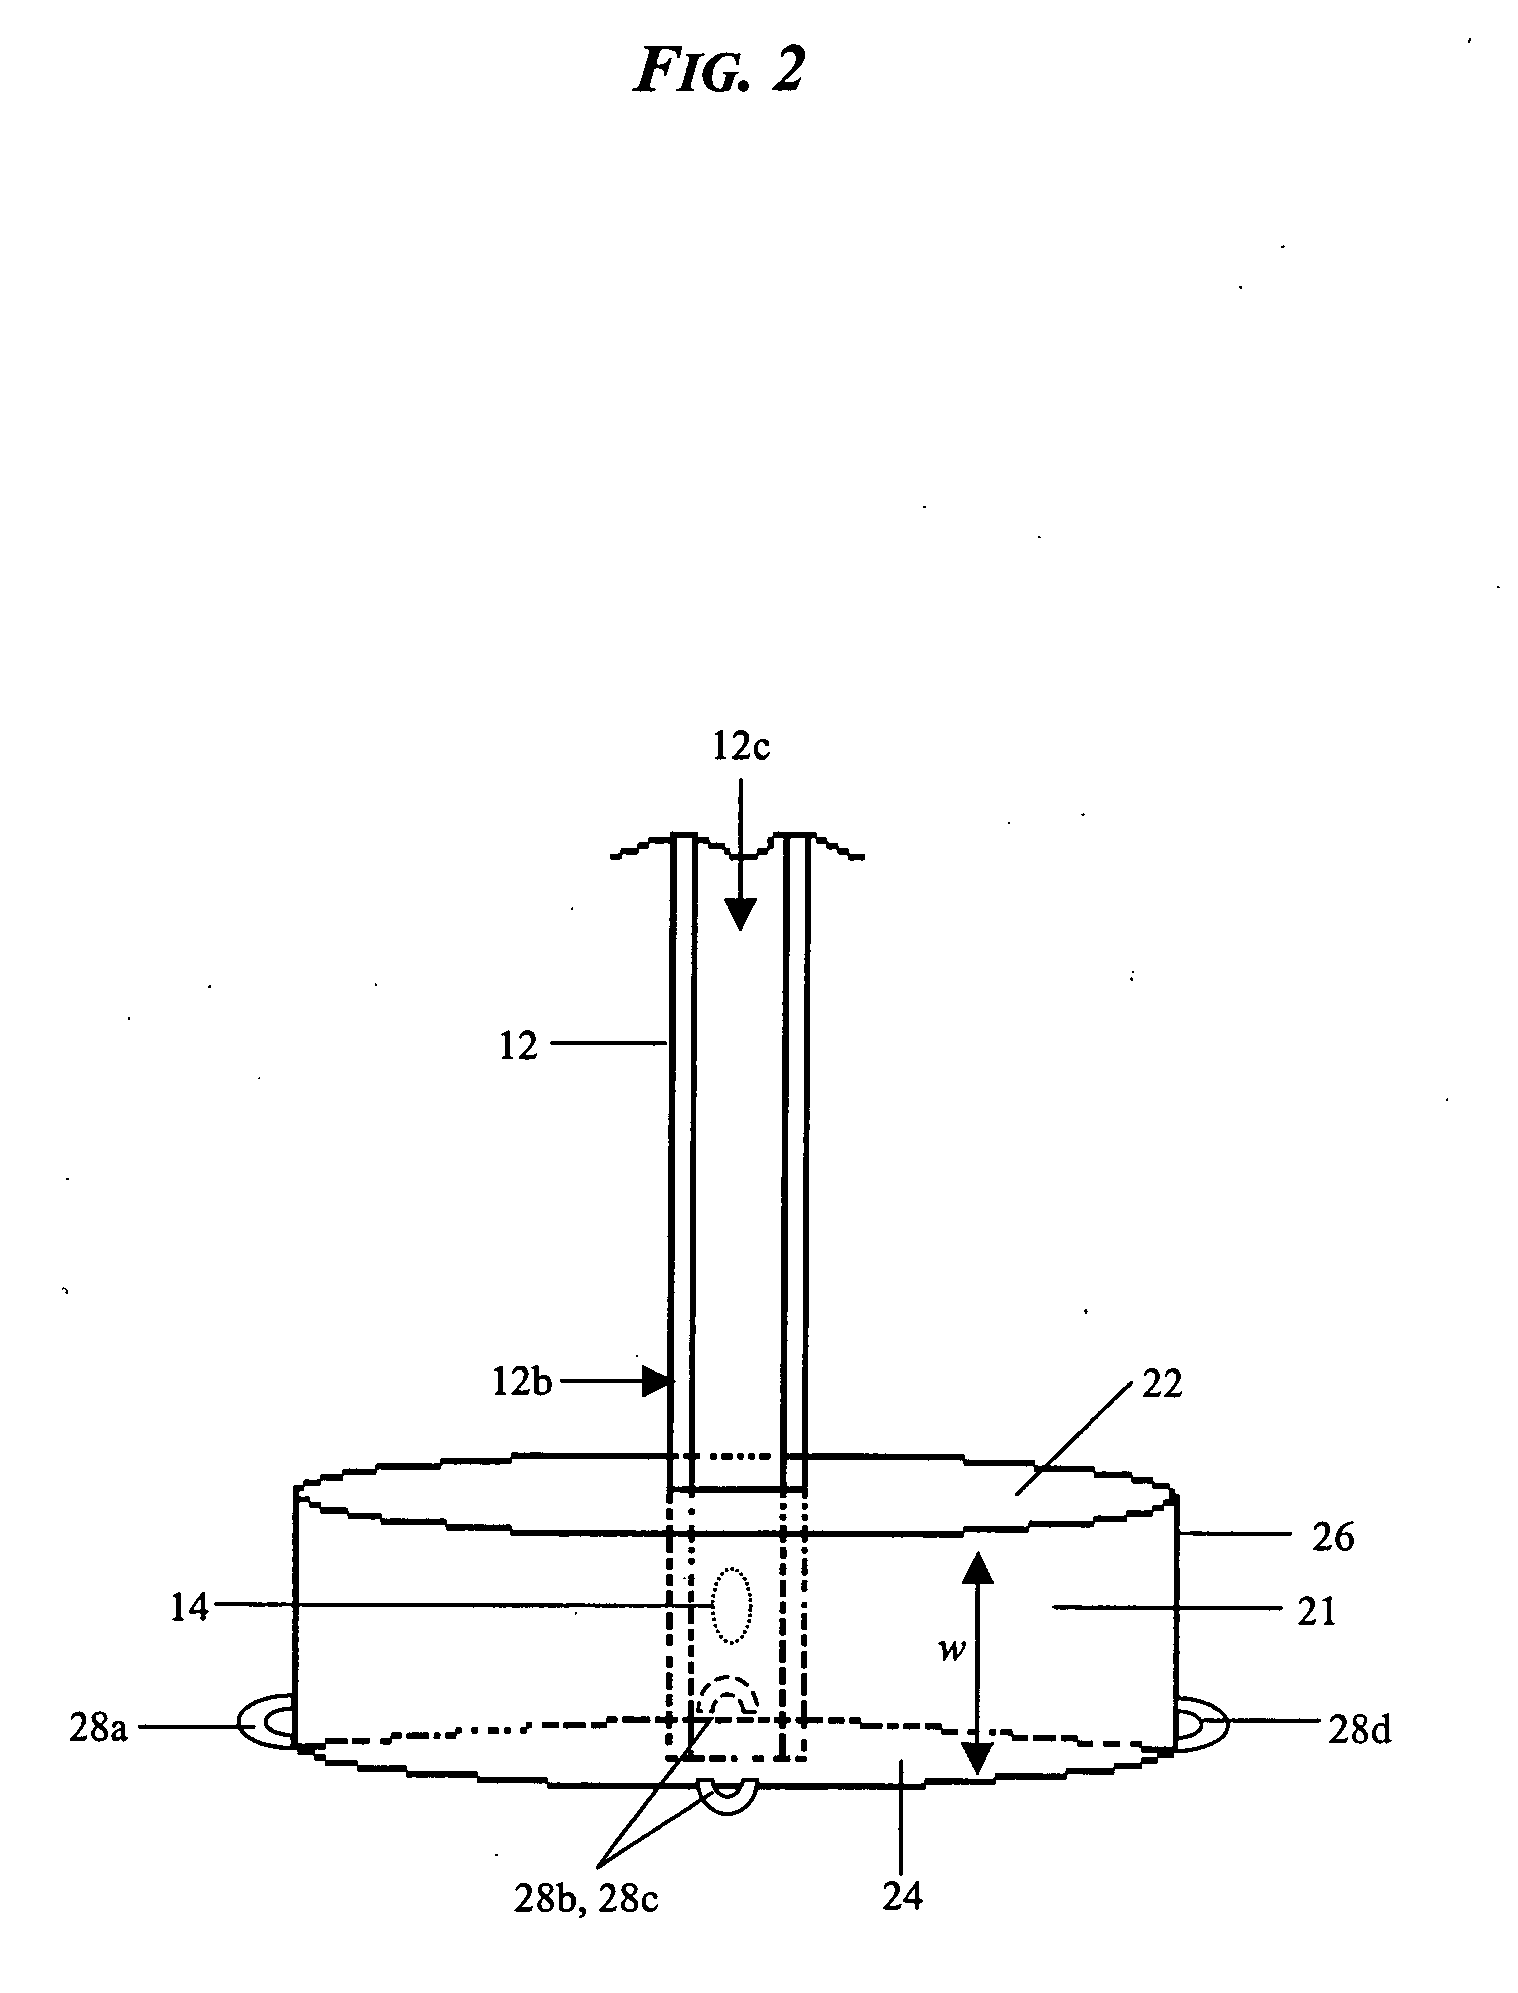 Brachytherapy apparatus and method for treating a target tissue through an external surface of the tissue